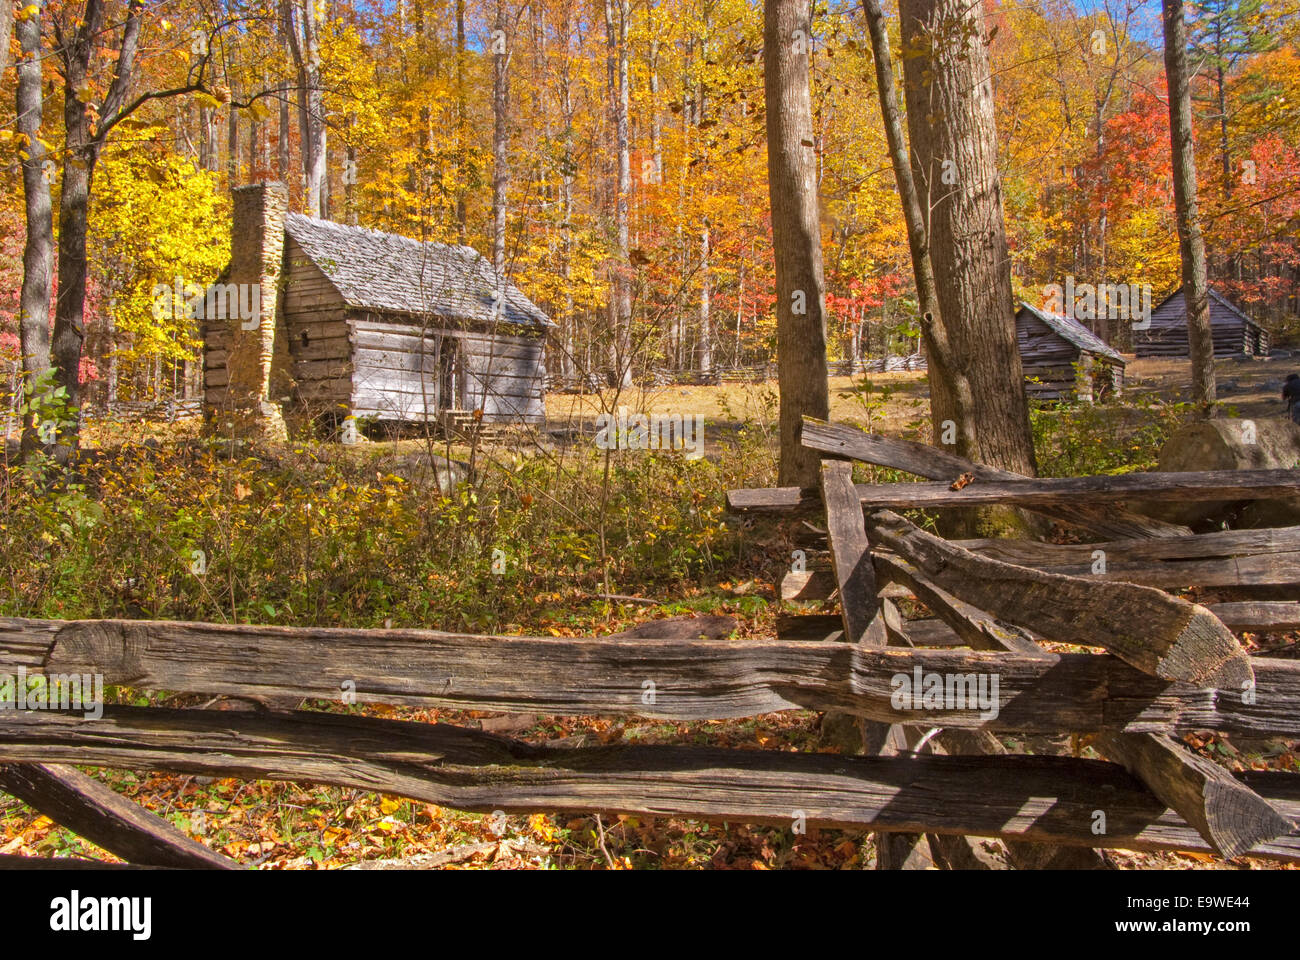 Alex Cole cabin on Roaring Fork Motor Nature Trail in Great Smoky Mountains National Park during autumn. Stock Photo